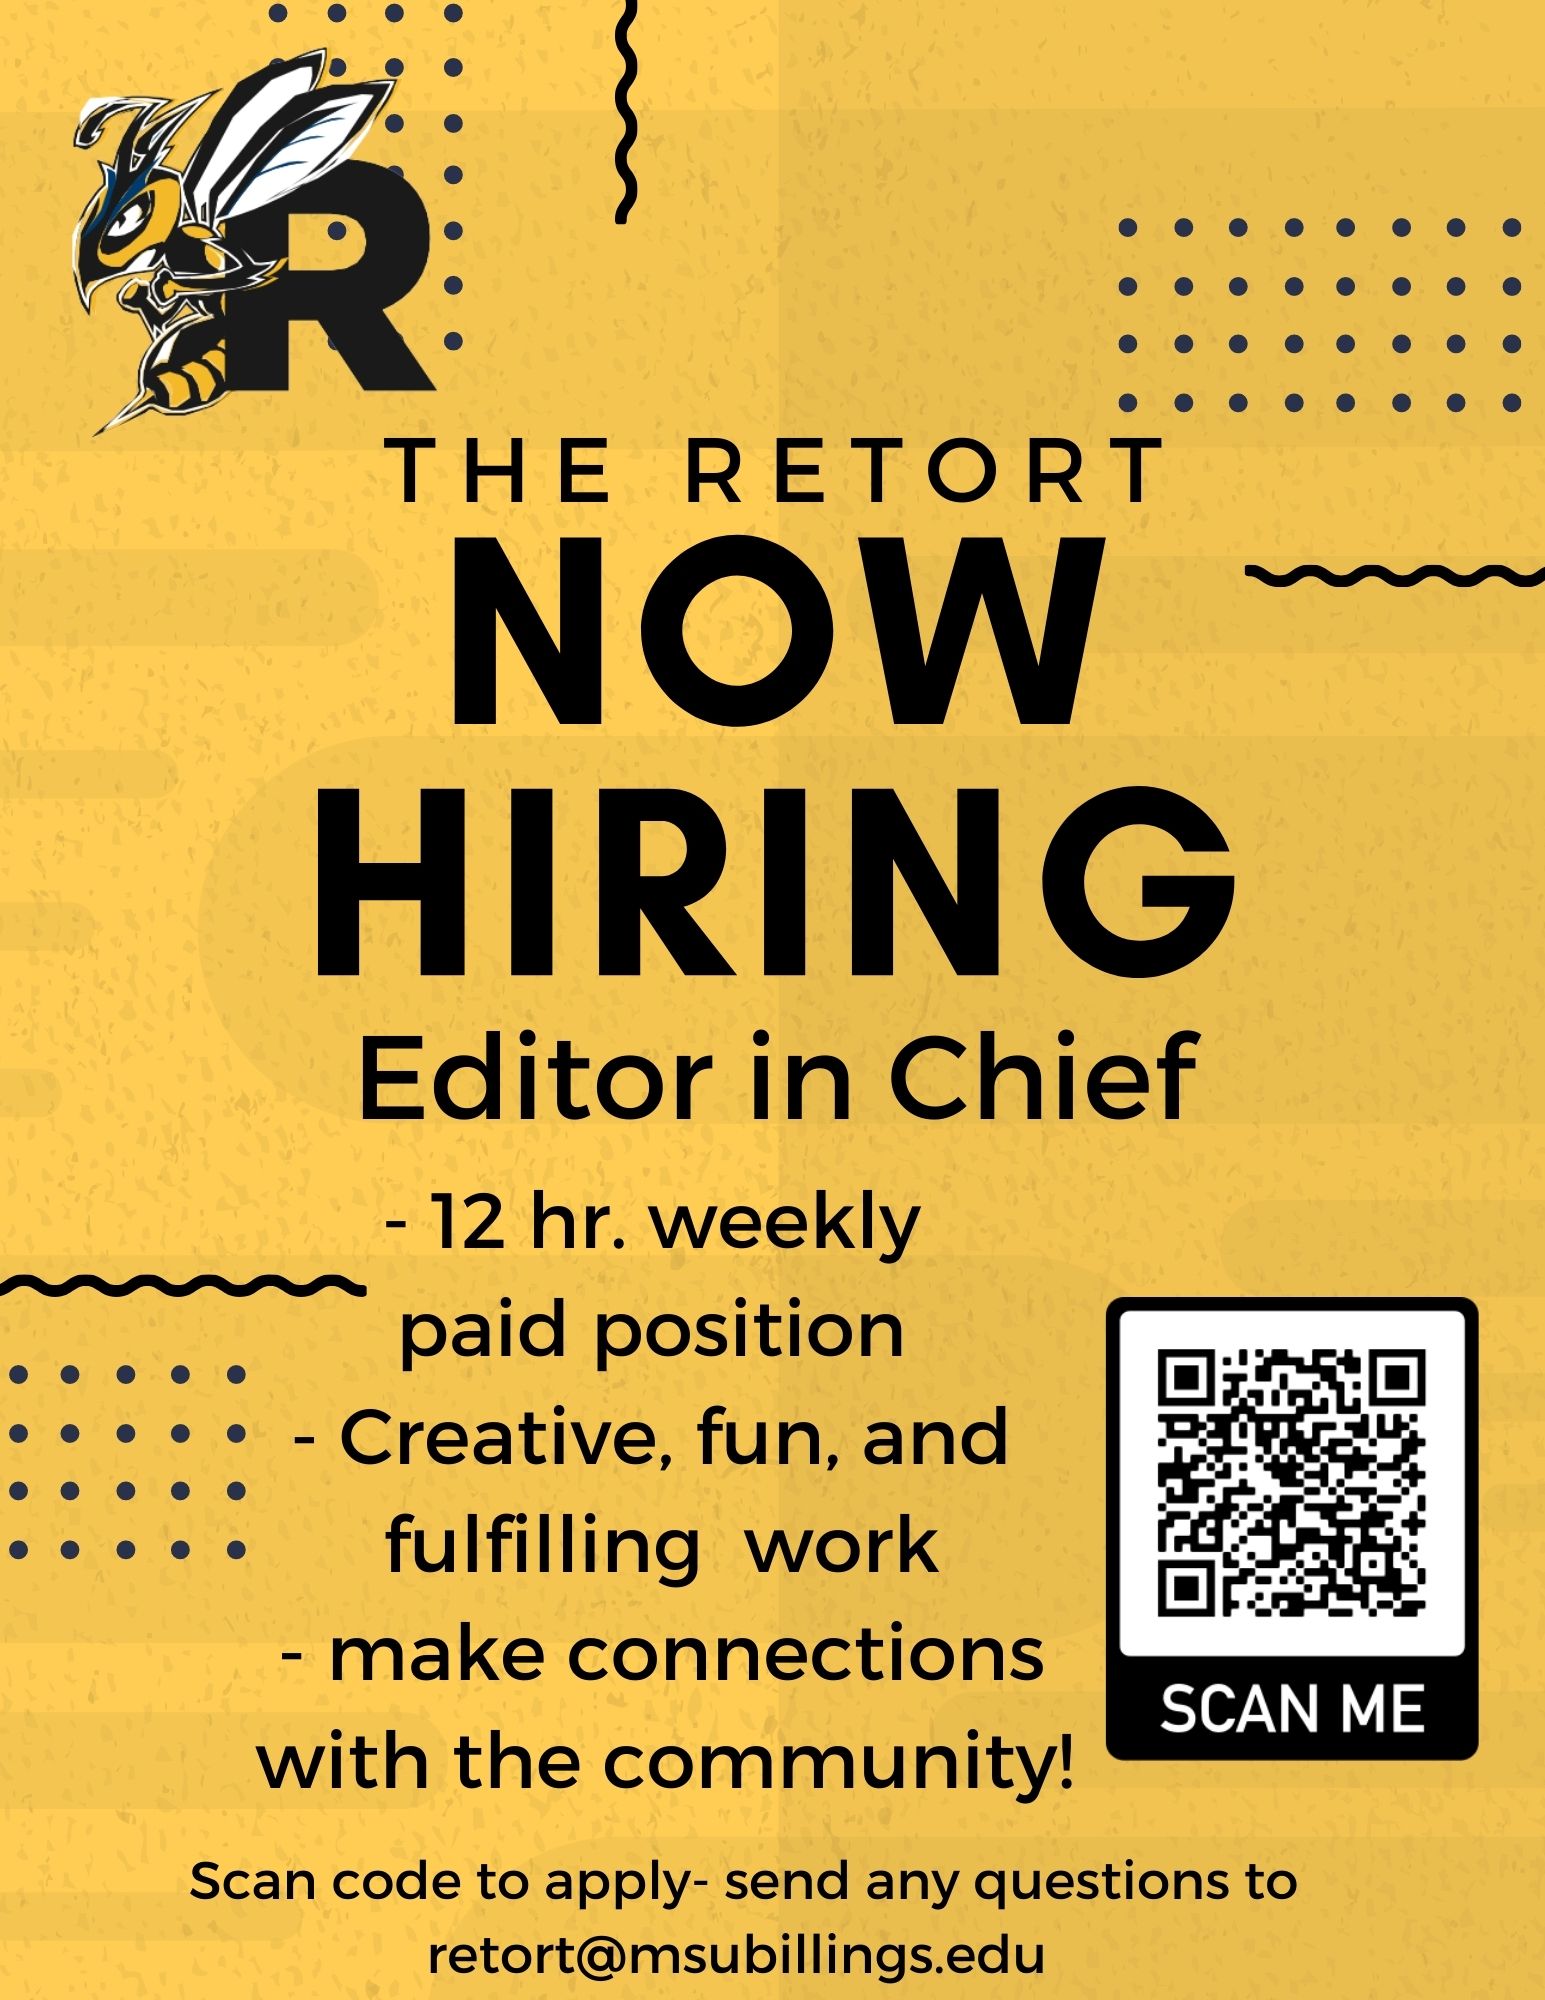 Job advertisement for editor in chief position